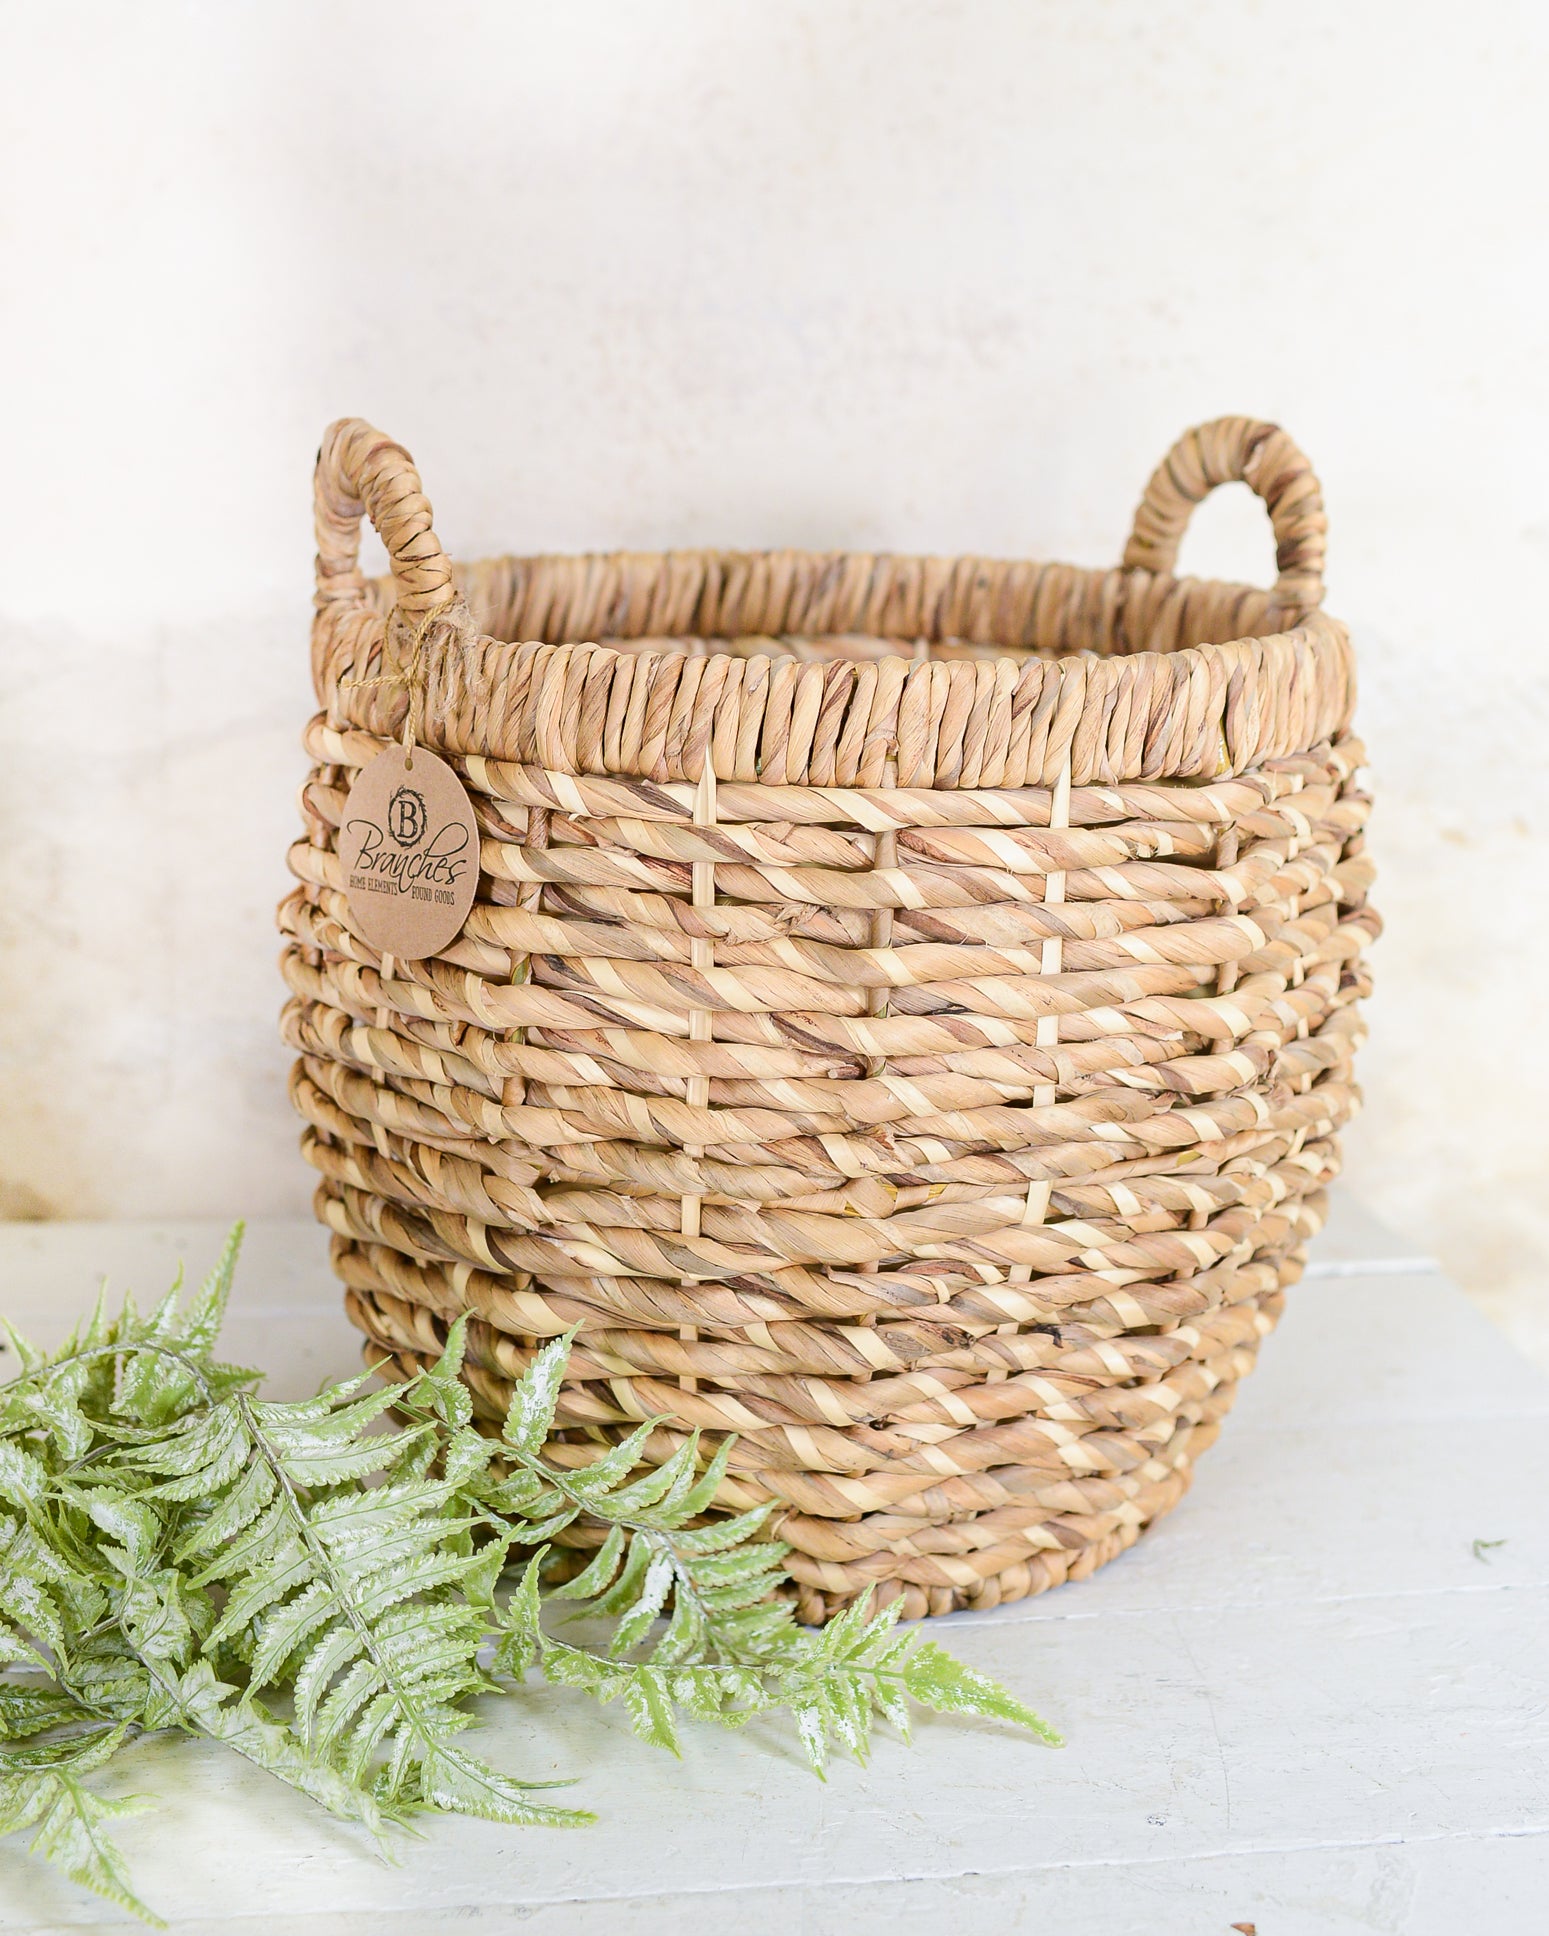 Chunky Woven Basket Varies by Size